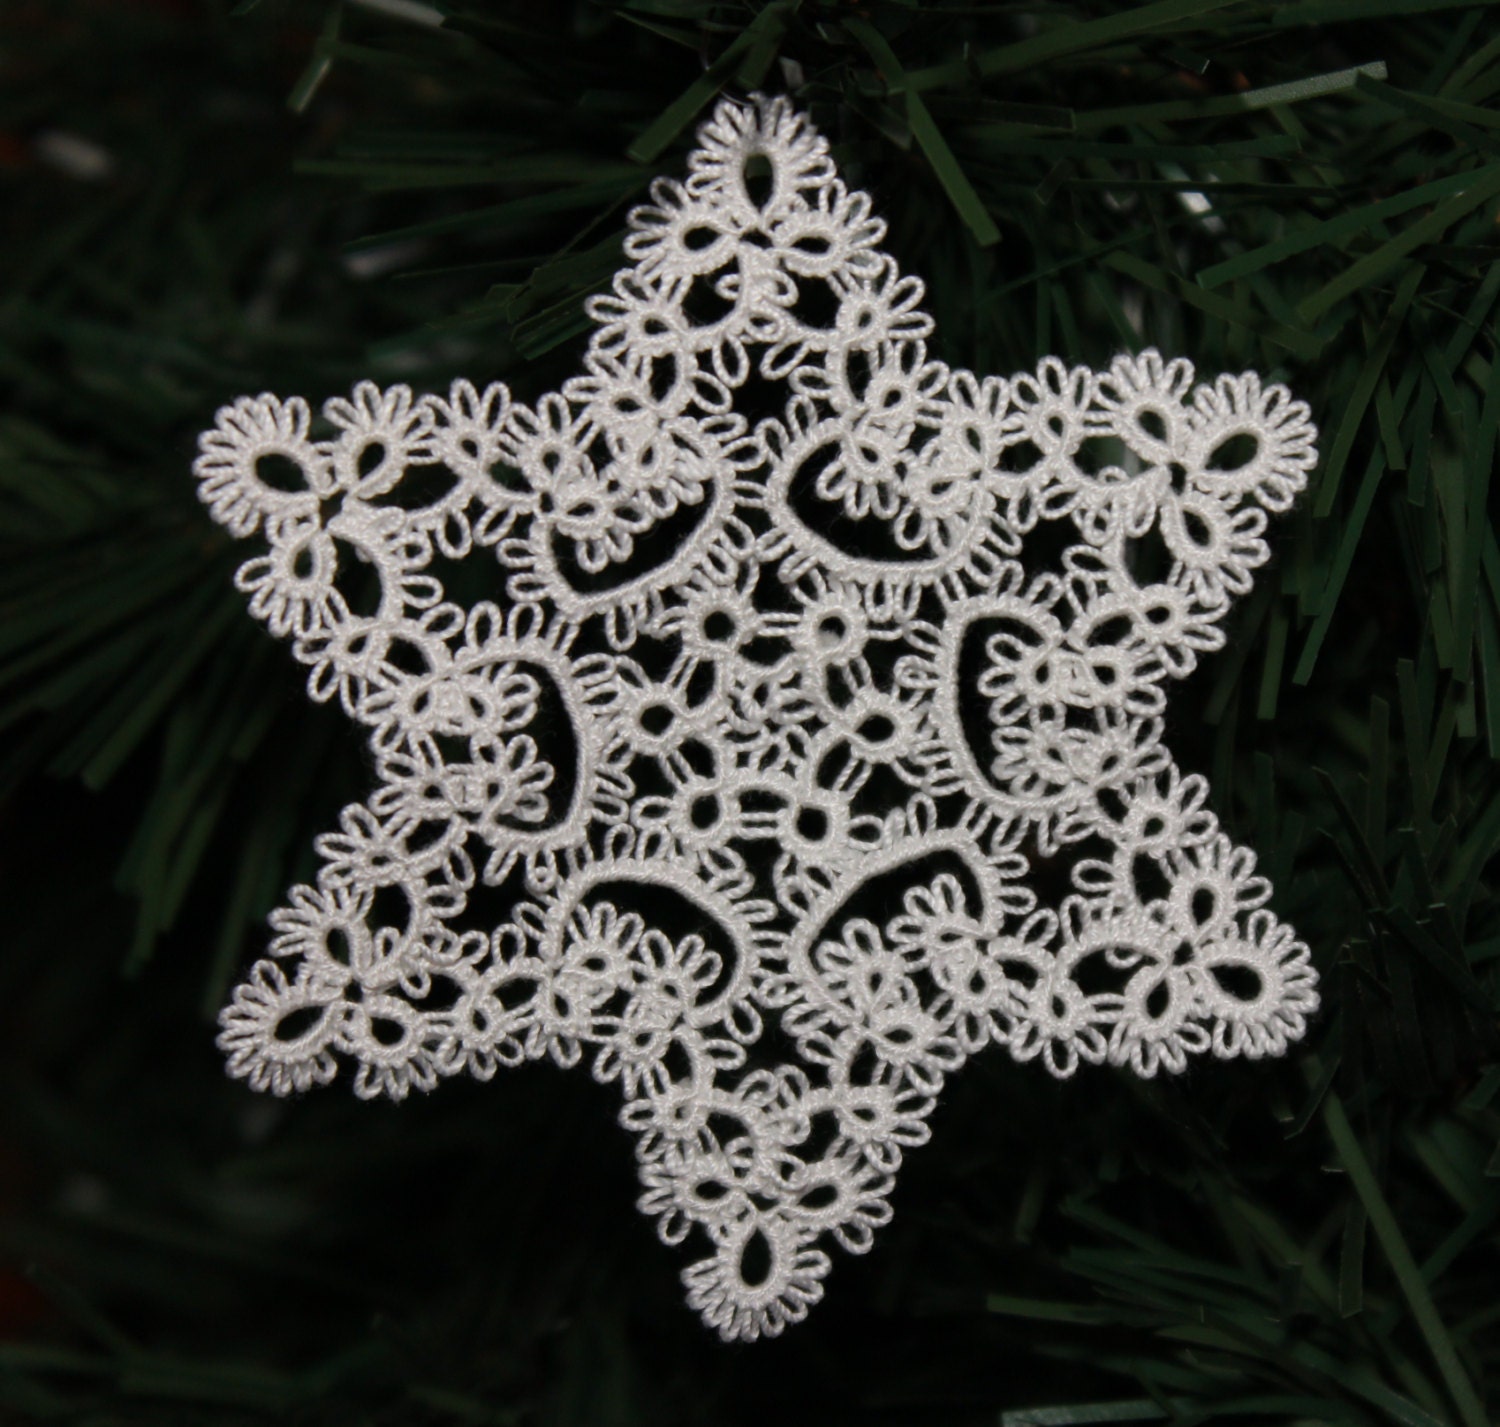 Tatted STARFLAKE Snowflake STAR of DAVID in Tatting - a 3" ornament or snowflake